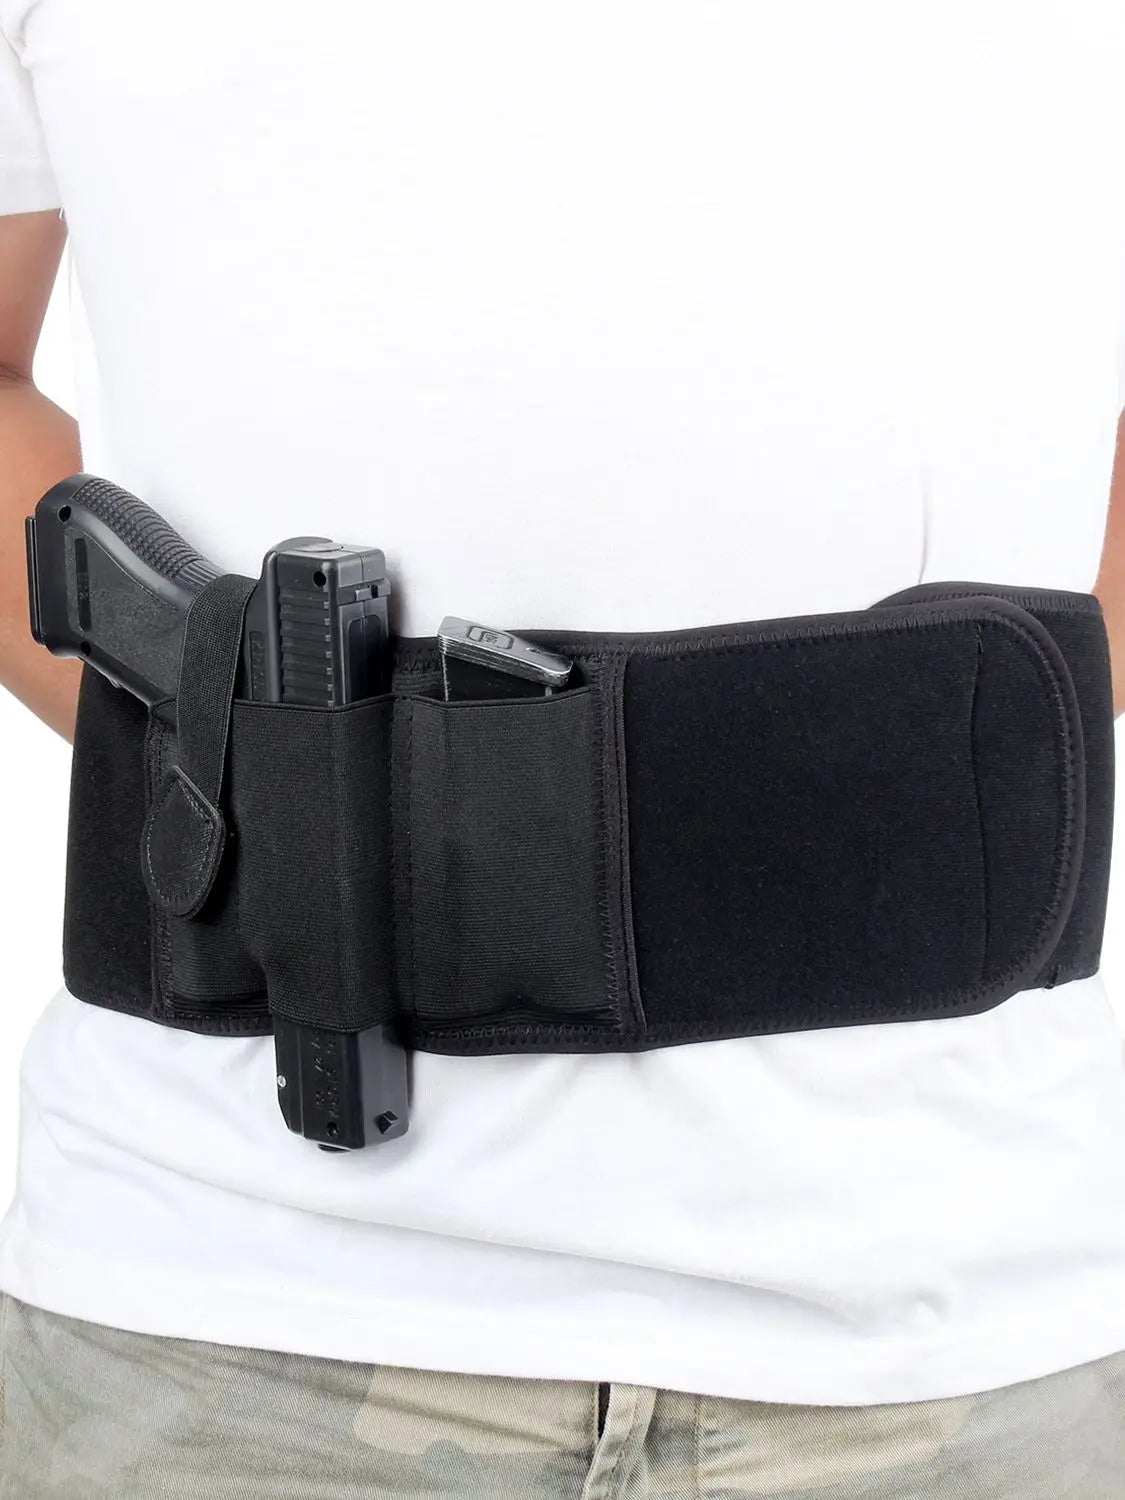 Kosibate Tactical Belly Band Concealed Carry Gun Holster Left/Right-hand Universal Invisible Elastic Waist Pistol Holster Girdle